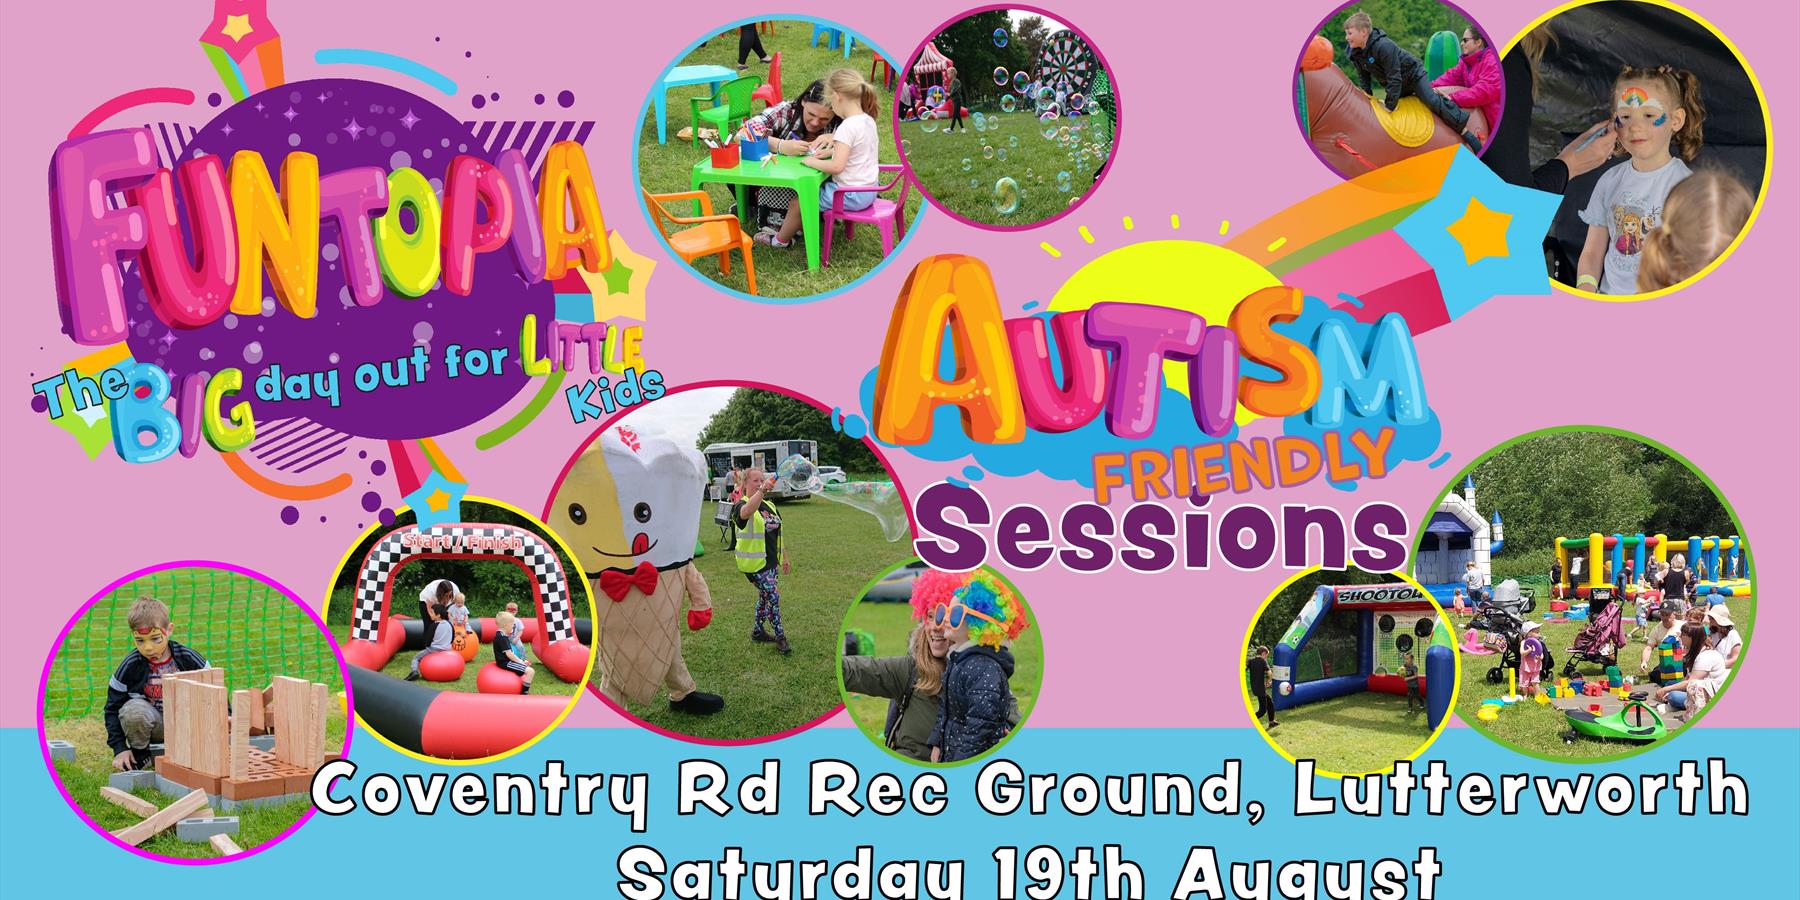 Autism Friendly Session at Lutterworth Funtopia